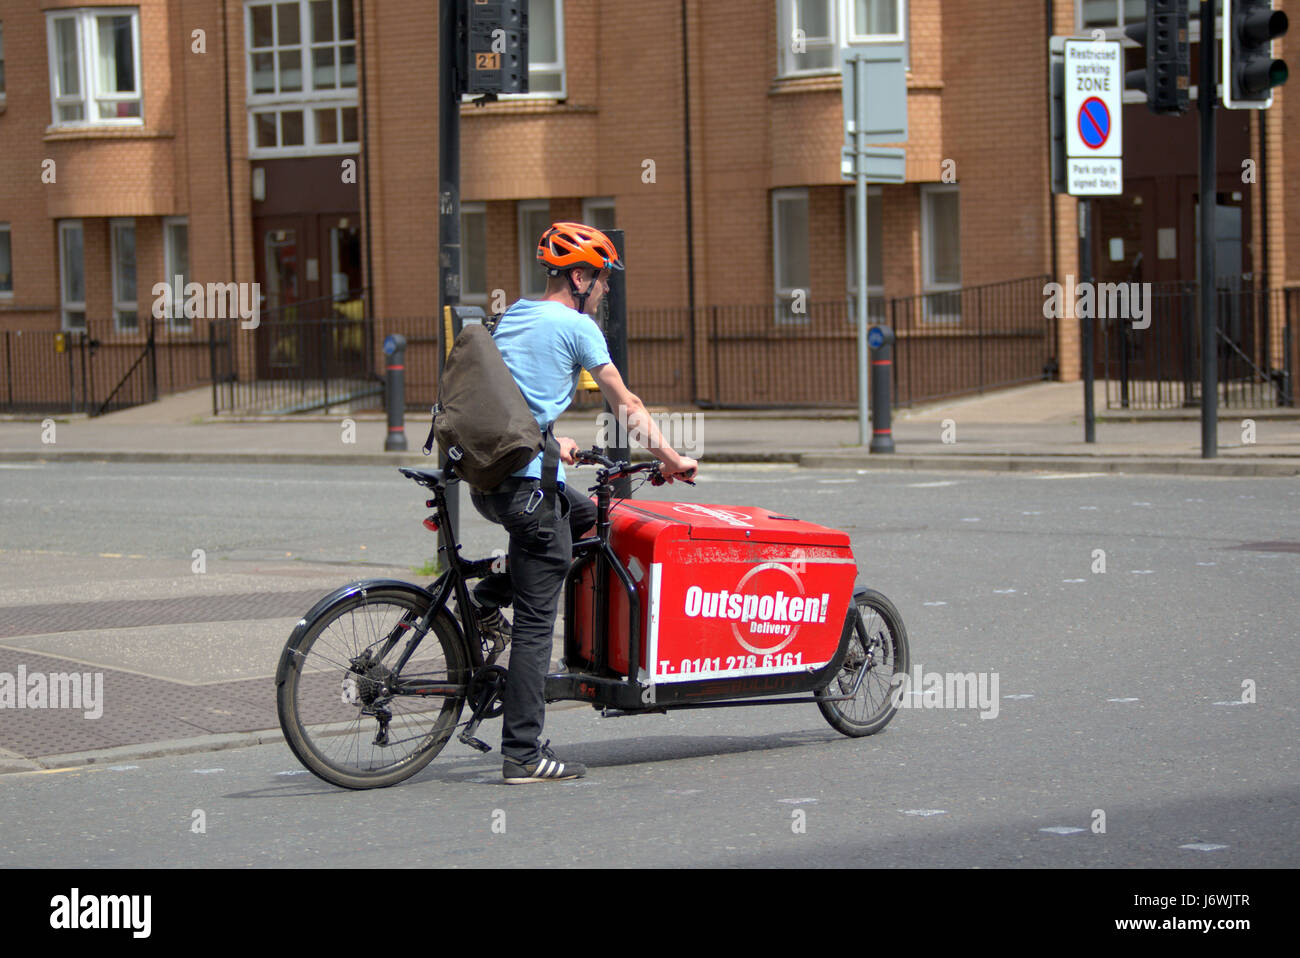 bicycle bike delivery cargo delivery Stock Photo